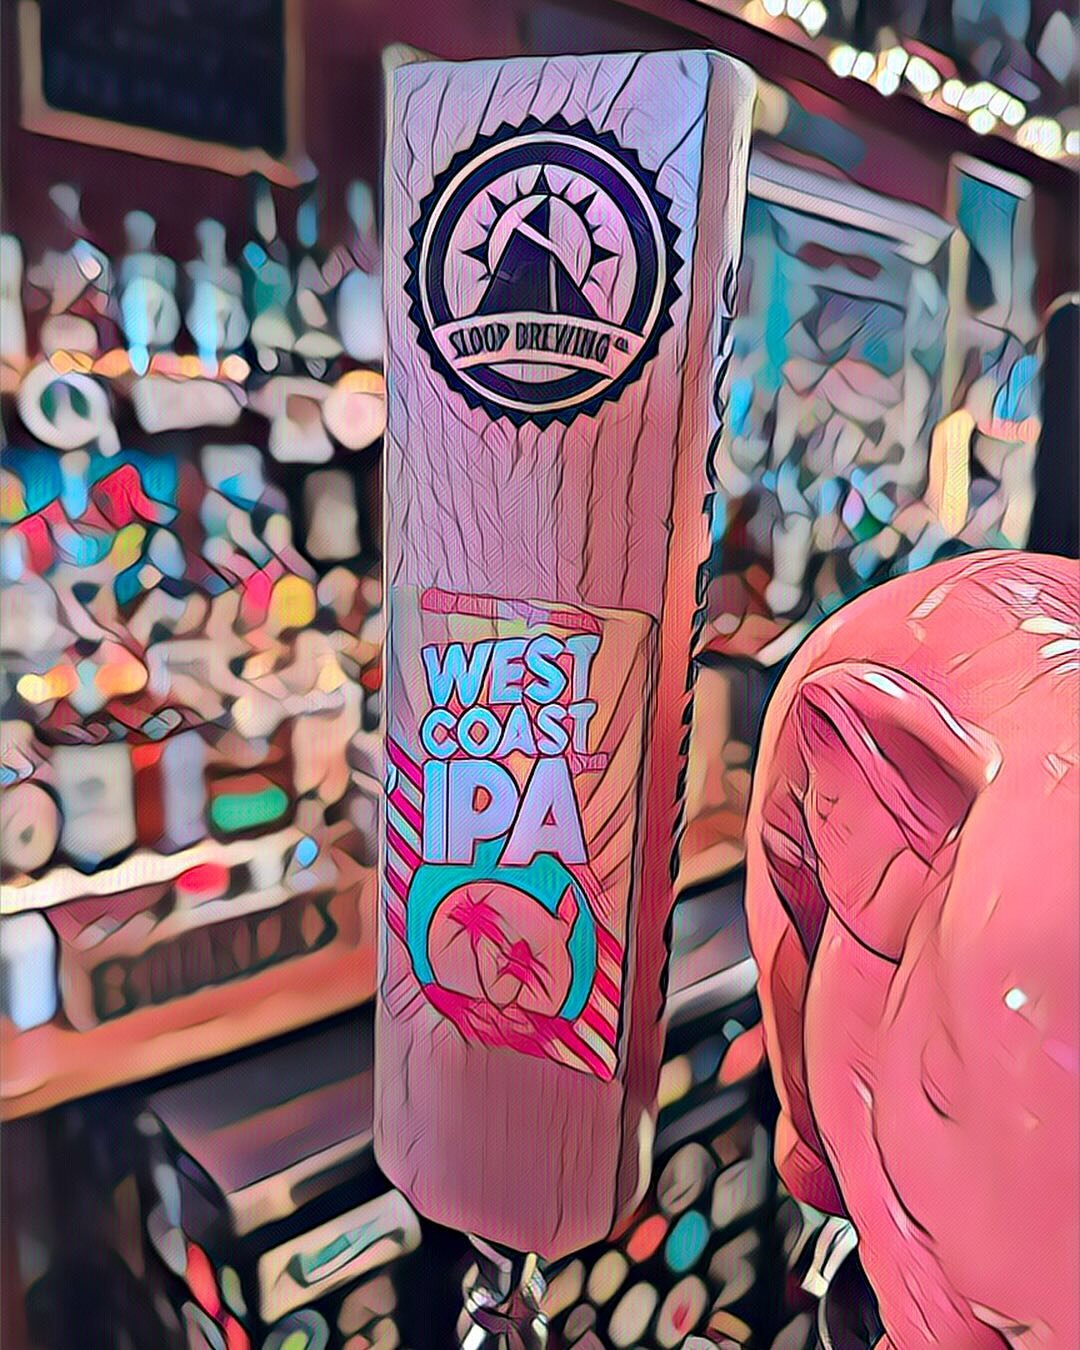 Head west with @sloopbrewingco !!! Now on draft: West Coast Style IPA! 🍺 Surf&rsquo;s Up! 🏄&zwj;♀️ &ldquo;A classic, crisp IPA flavor from Sloop Brewing Co. West Coast IPA returns to the clean, resiny finish that IPAs were born to have. At 7% abv t